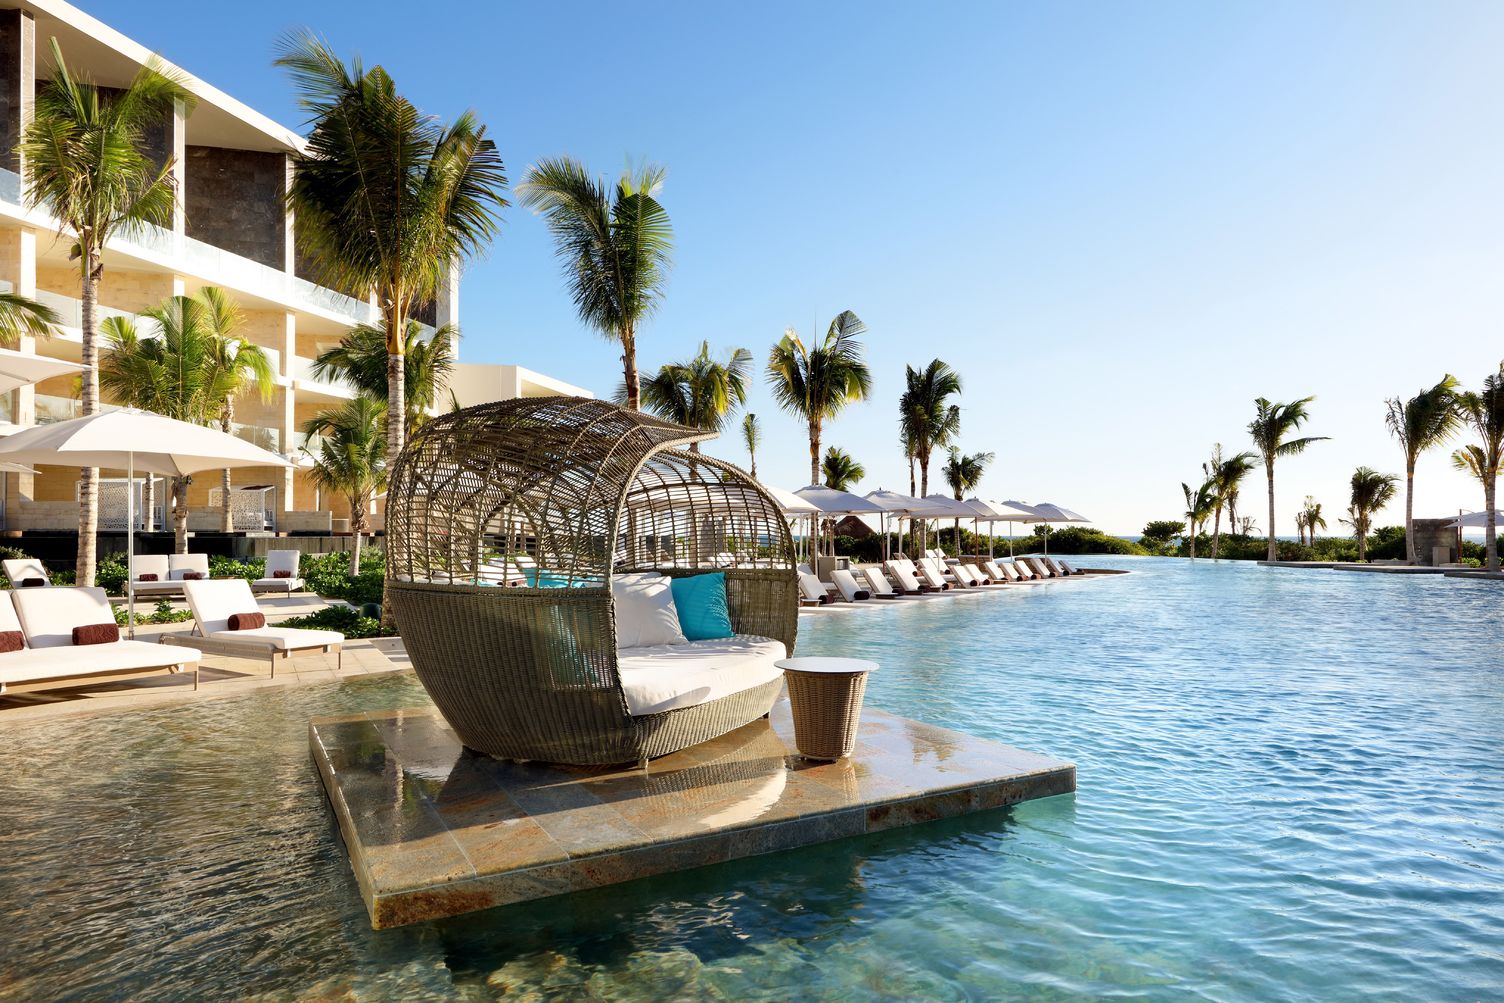 Covered chair on the pool at TRS Coral Costa Mujeres